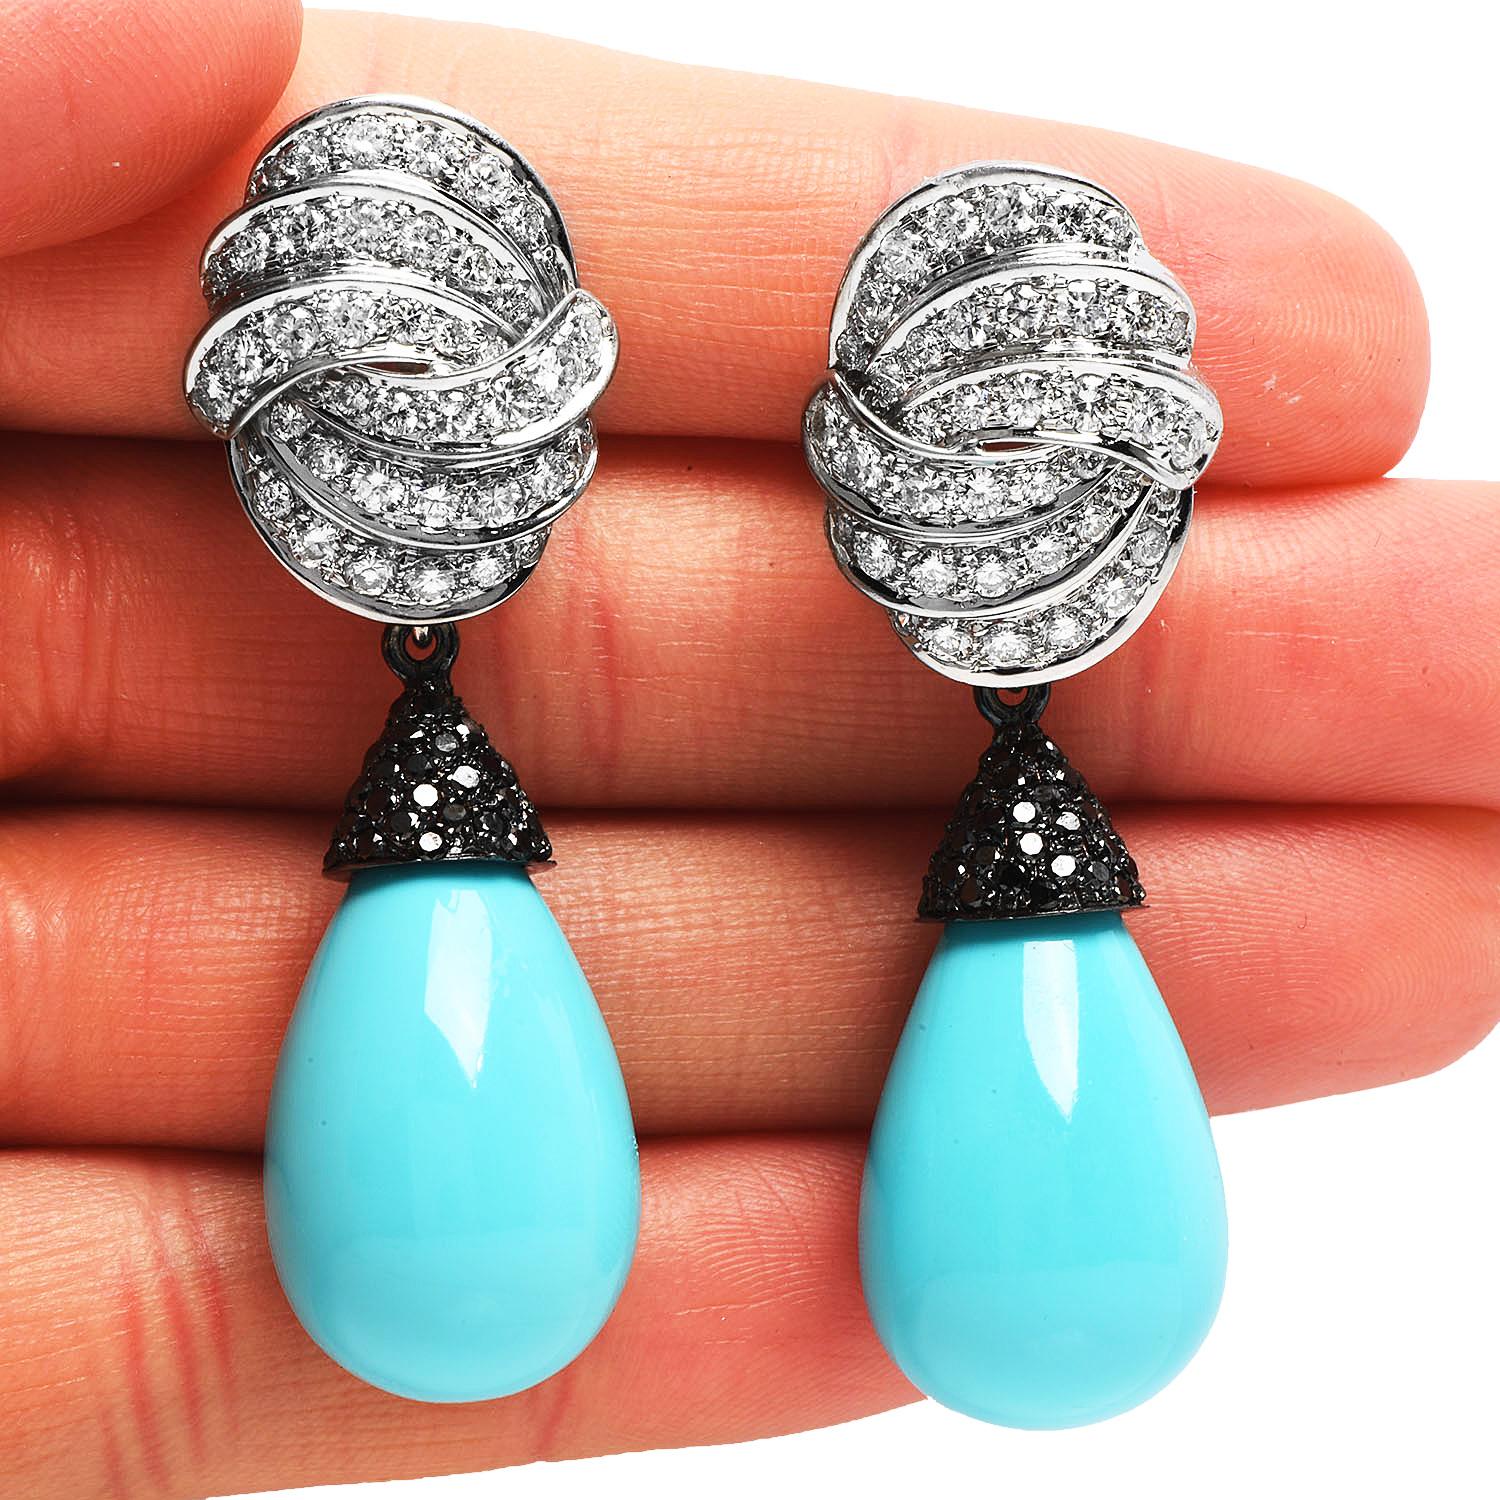 Exquisite vintage retro earrings day and Night from circa the 1990s.

with a crossover design on the top and a colorful dangle drop design. 

they are crafted in luxurious 18K white gold.

Topped with a sparkly (80)